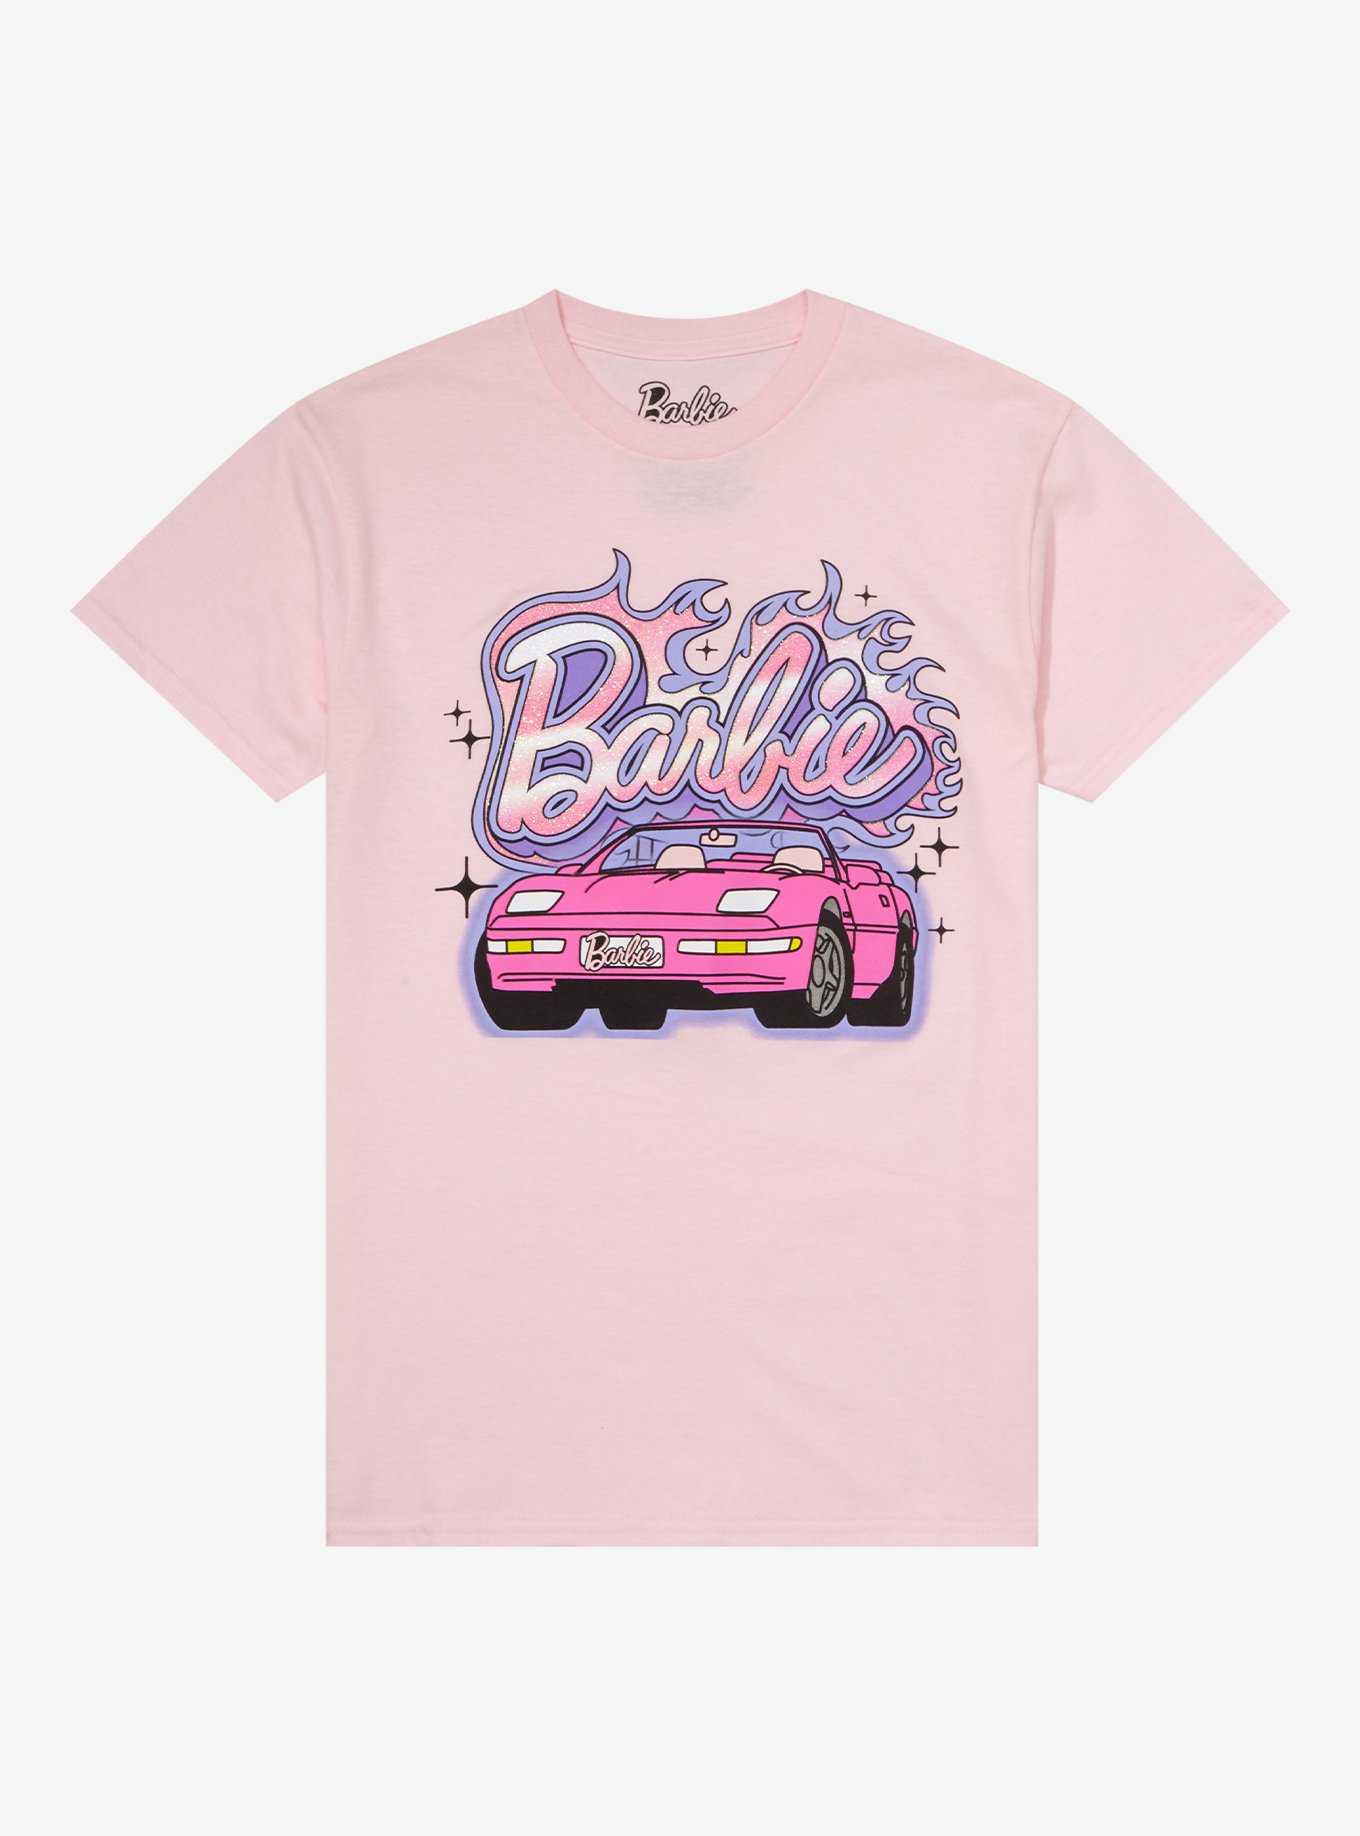 & Hot OFFICIAL Topic Barbie Merch | Shirts